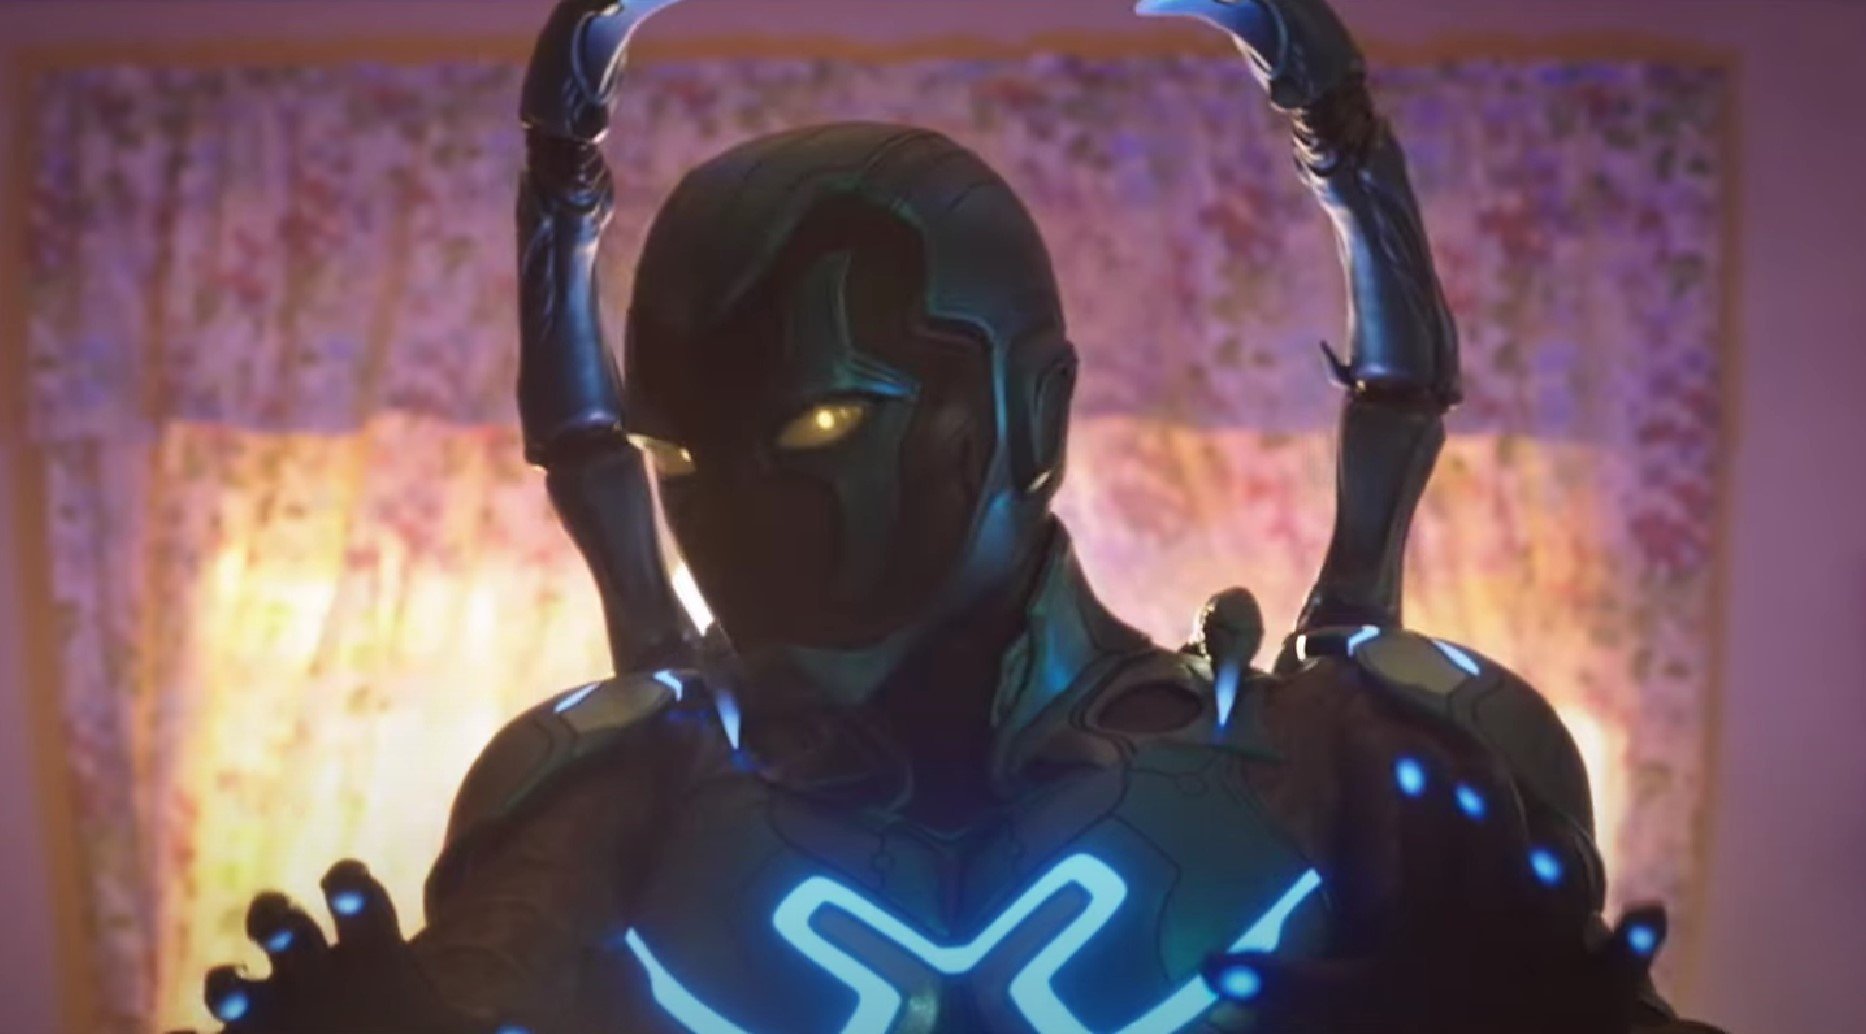 DC Superhero Blue Beetle Suits Up in Latest Trailer